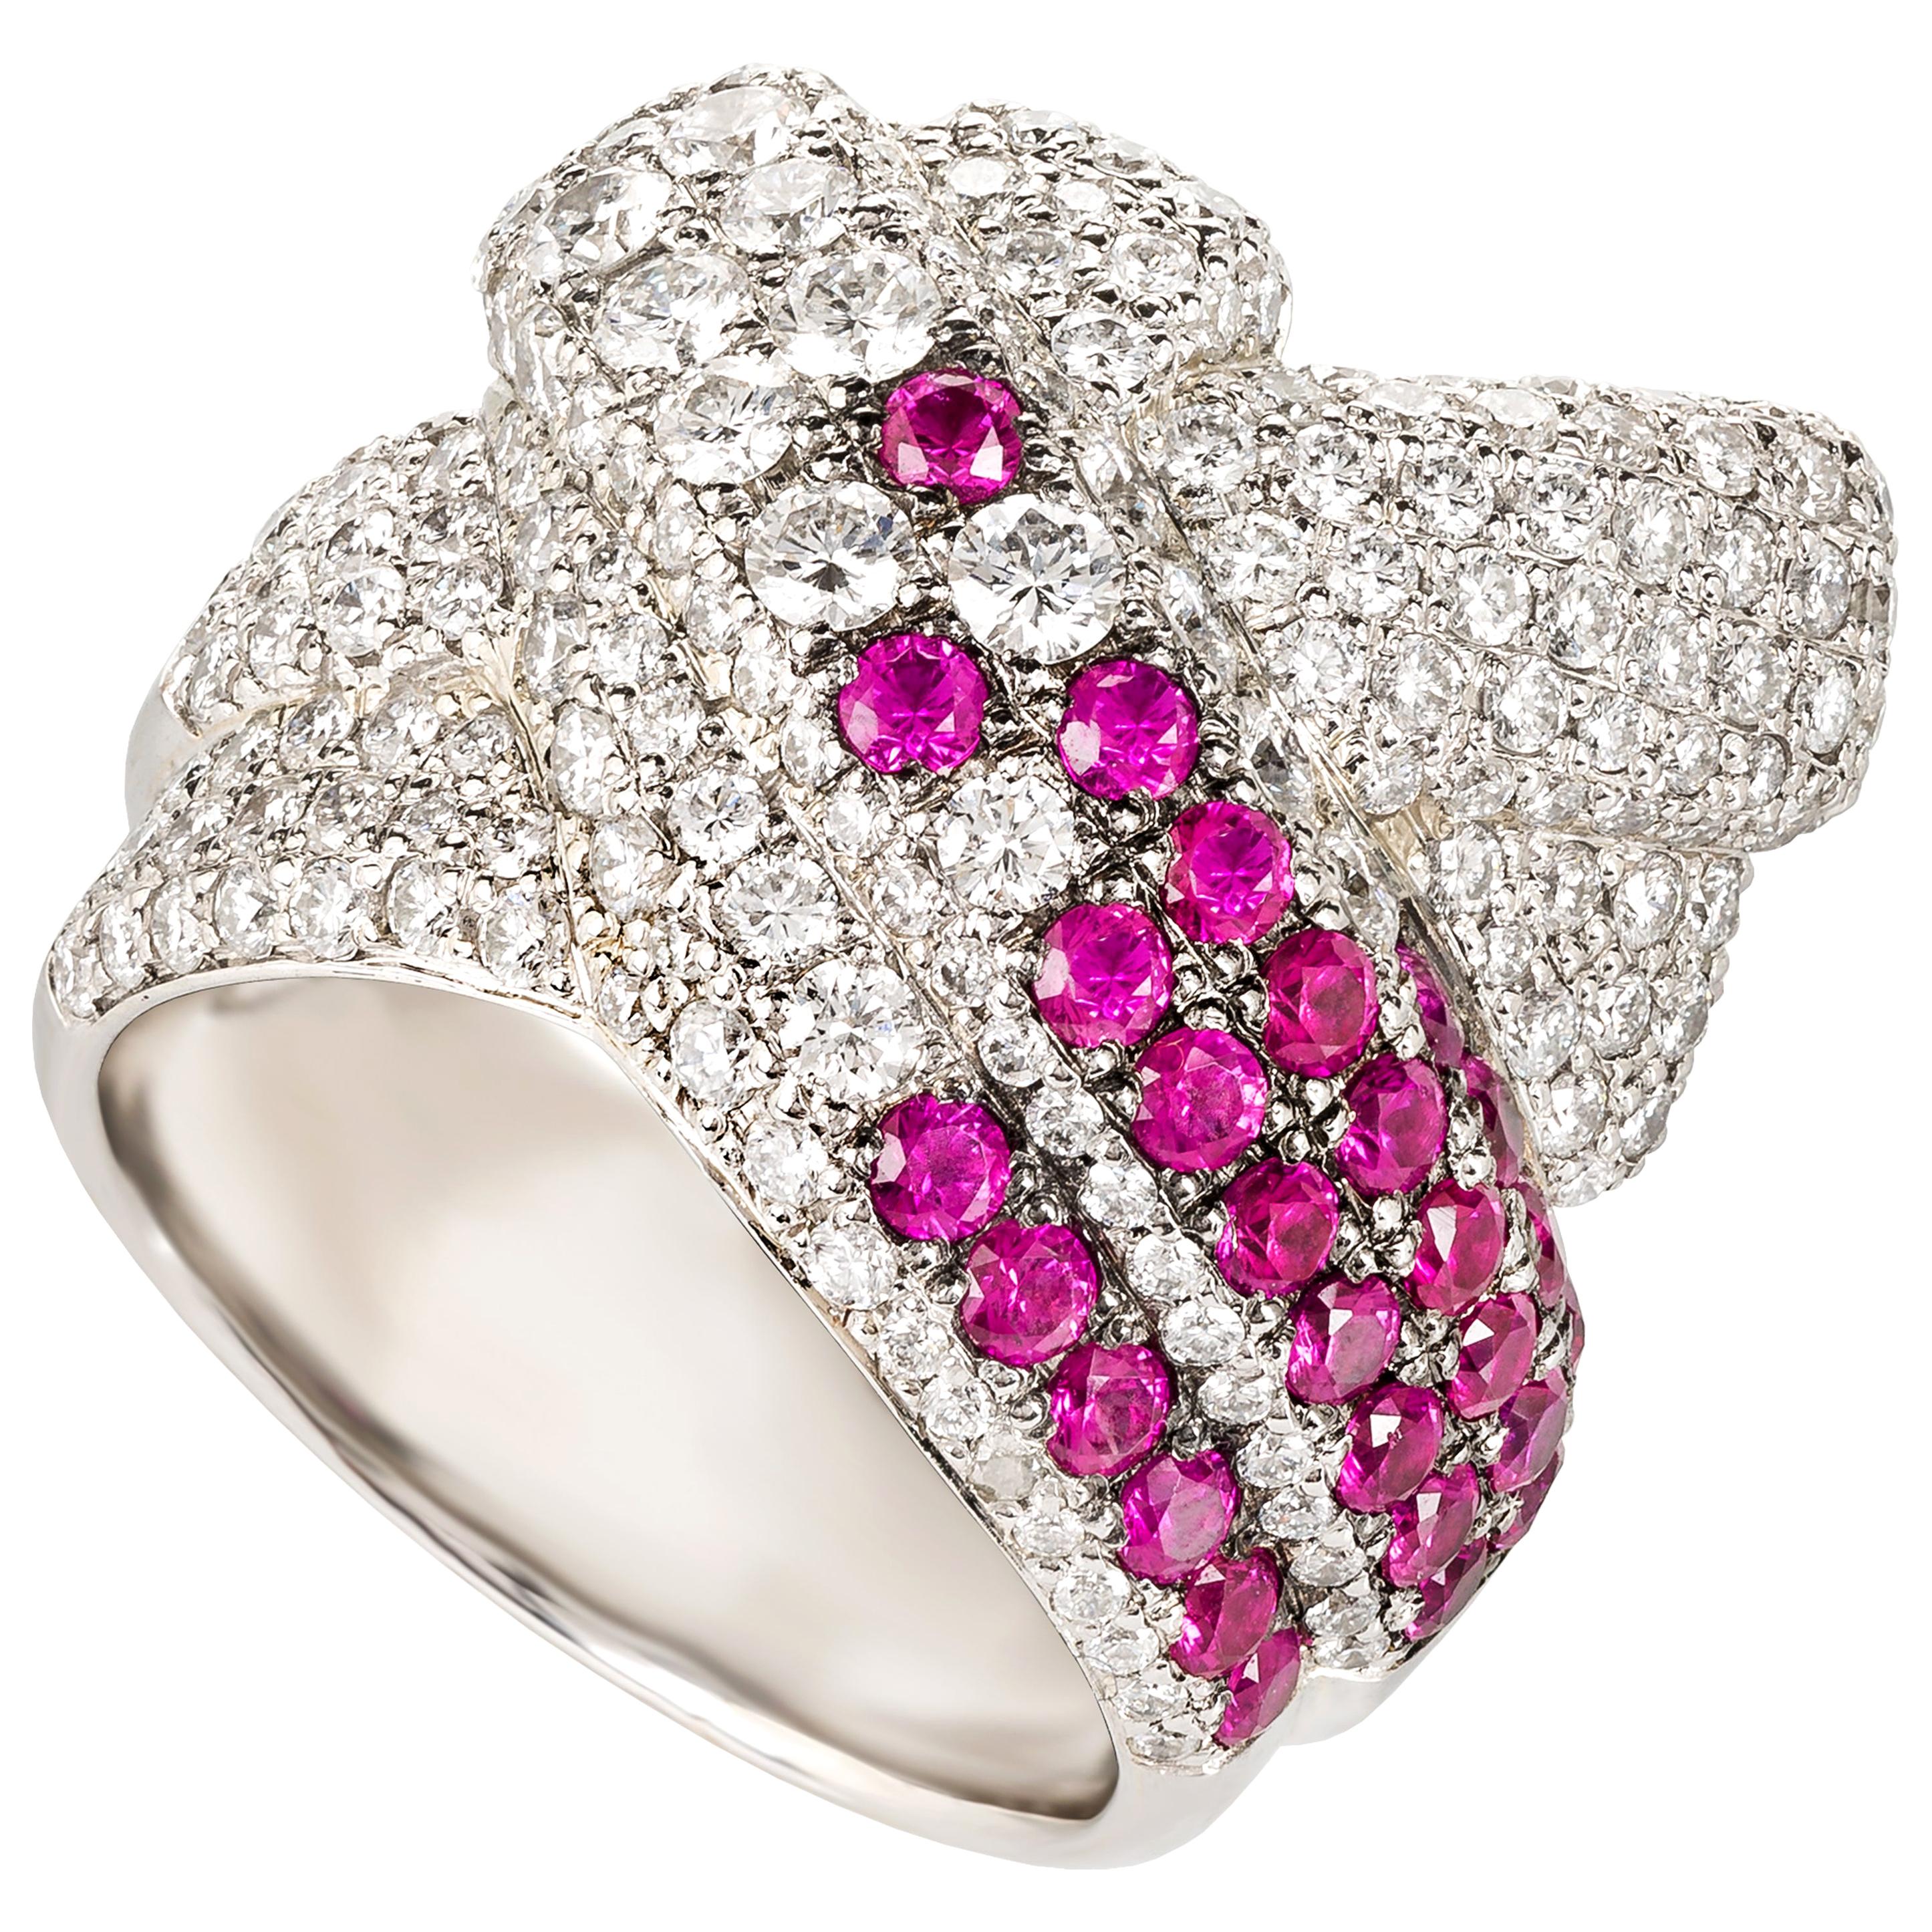 Rosior one-off Diamond and Ruby Cocktail Ring set in 950 Platinum